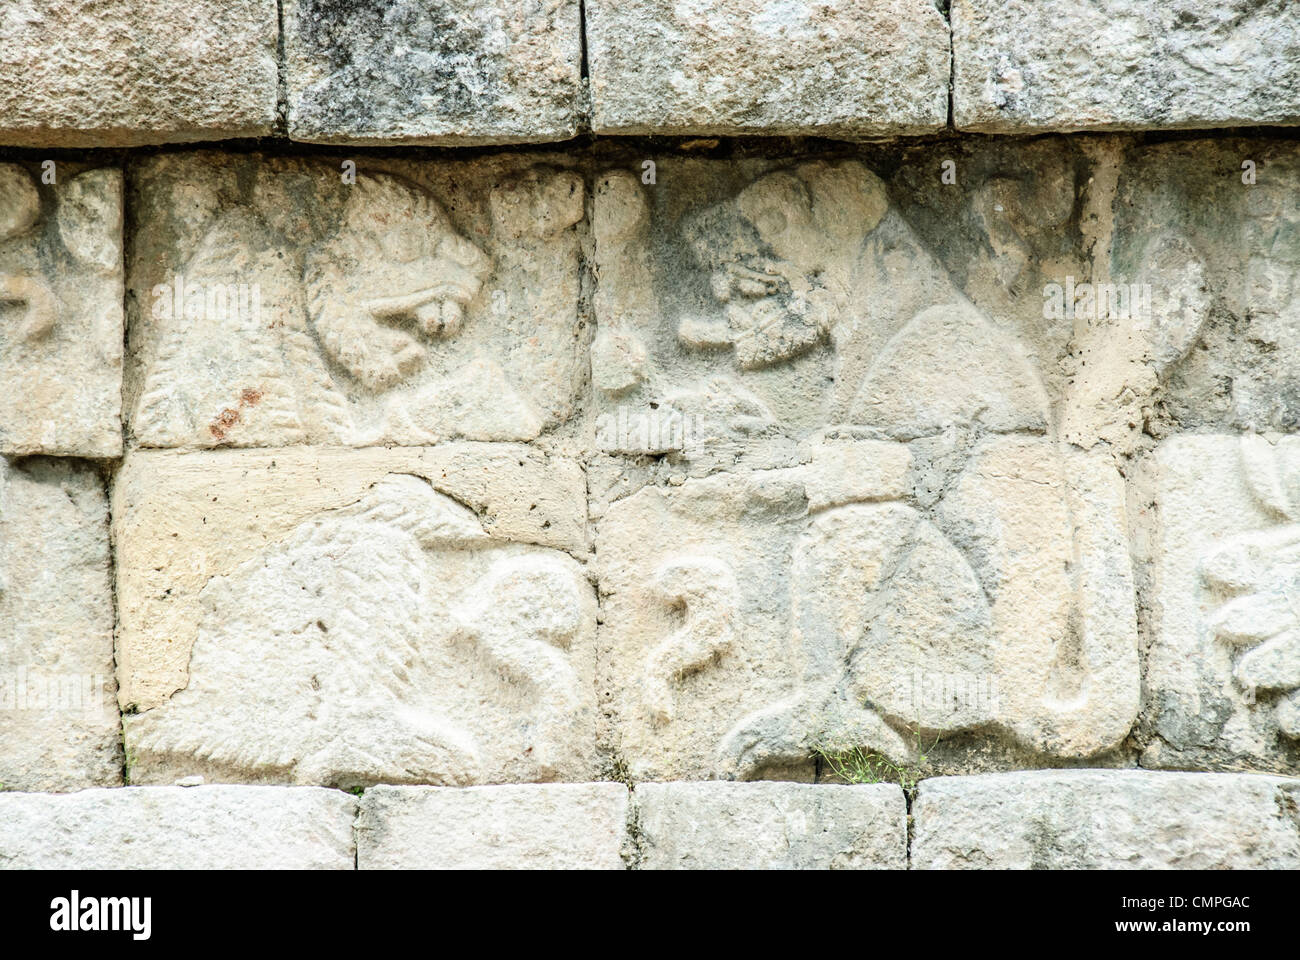 CHICHEN ITZA, Mexico - Carvings of jaguars on the walls of the Western Colonnade at Chichen Itza Archeological Zone, Chichen Itza, Mexico. Stock Photo